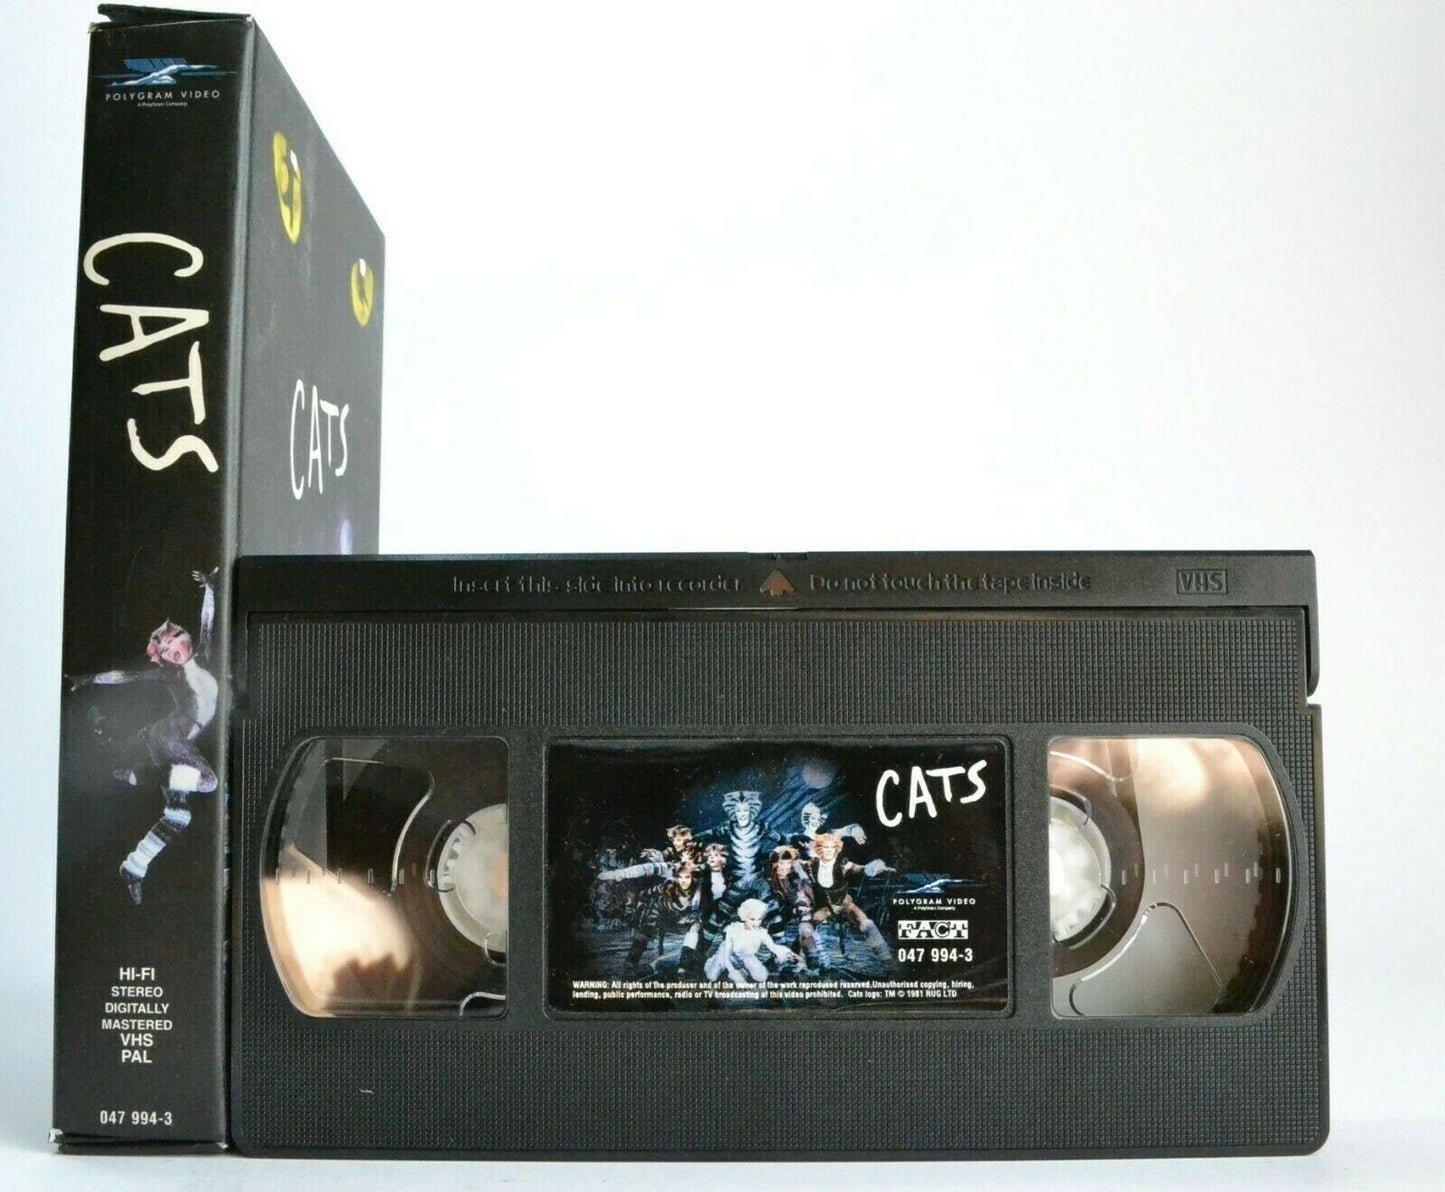 Cats; [Musical] -<T. S. Eliot>- Broadway Theatre - Andrew Lloyd Webber - Pal VH-